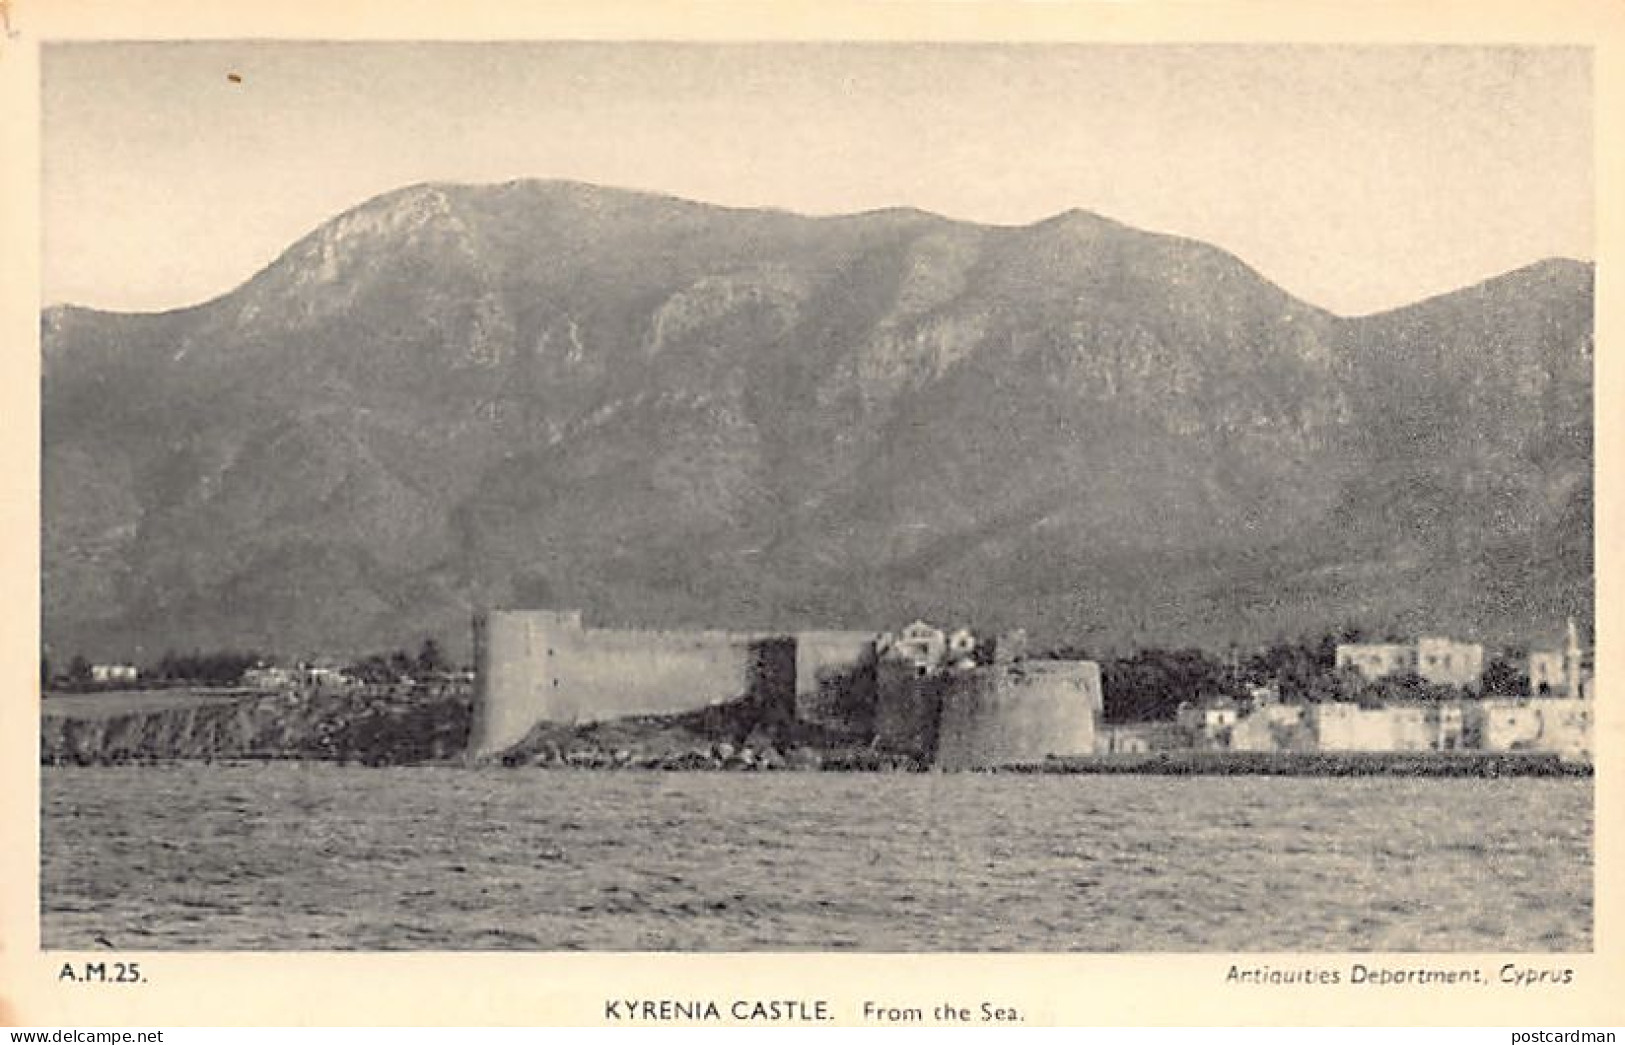 Cyprus - Kyrenia Castle From The Sea - Publ. Antiquities Department A.M. 25 - Chypre